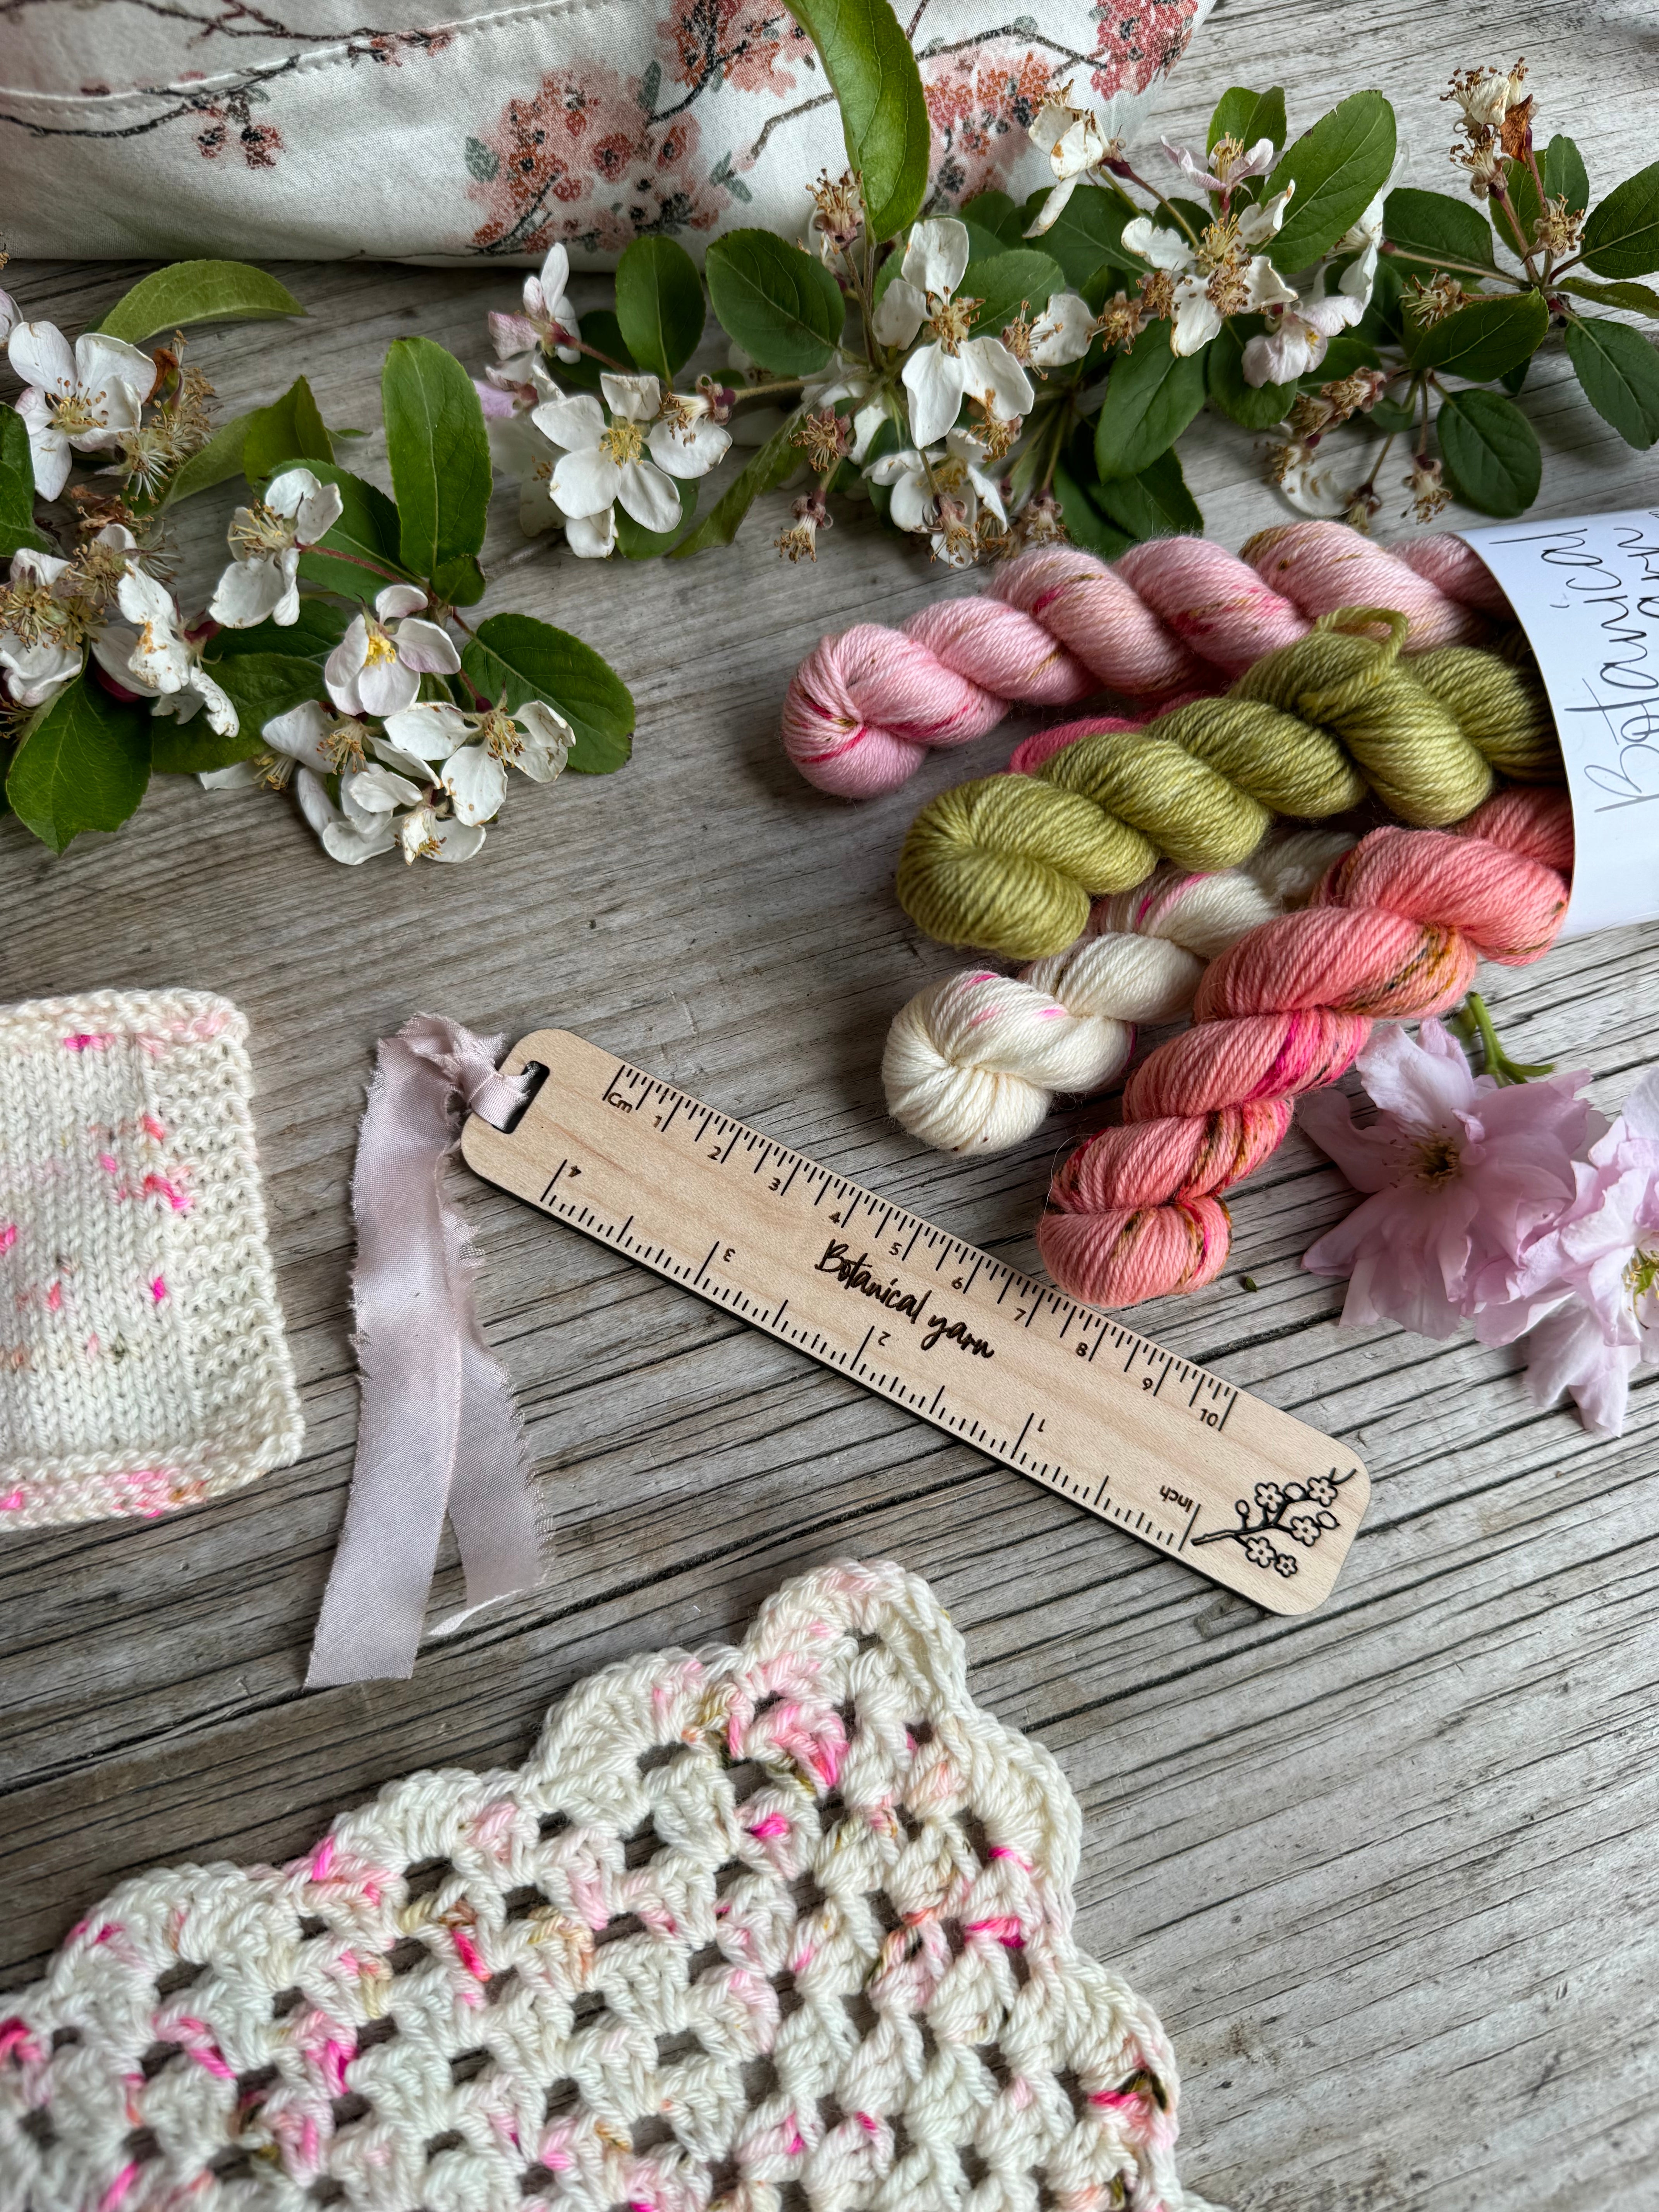 Sakura 4-inch Ruler with a Pale Pink Silk Ribbon made by Unwrapped Yarn